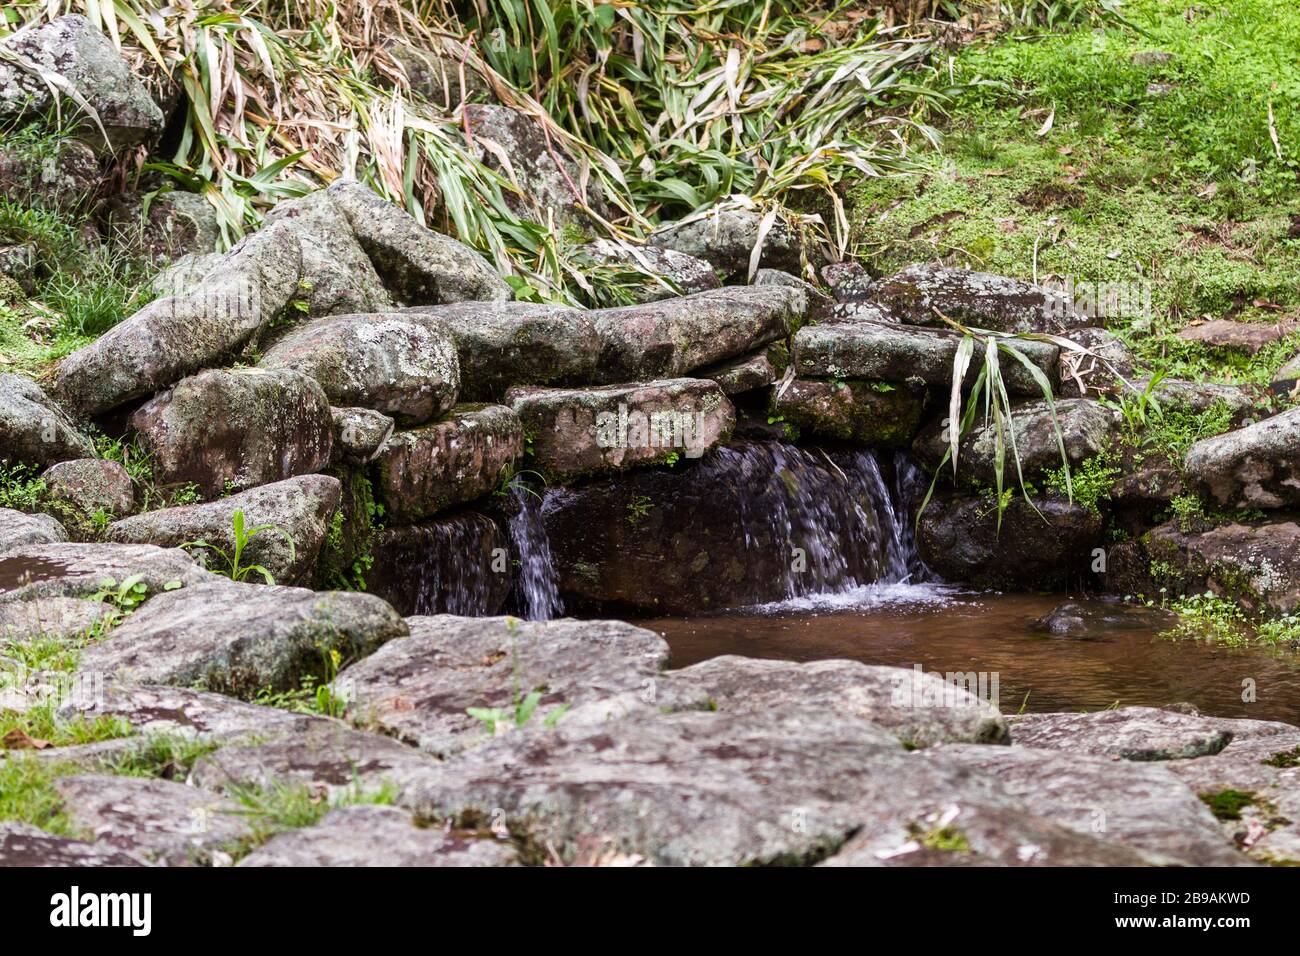 underground waterways and tunnels providing fresh spring water to this ancient civilization of Guayabo in Cartago Costa Rica Stock Photo